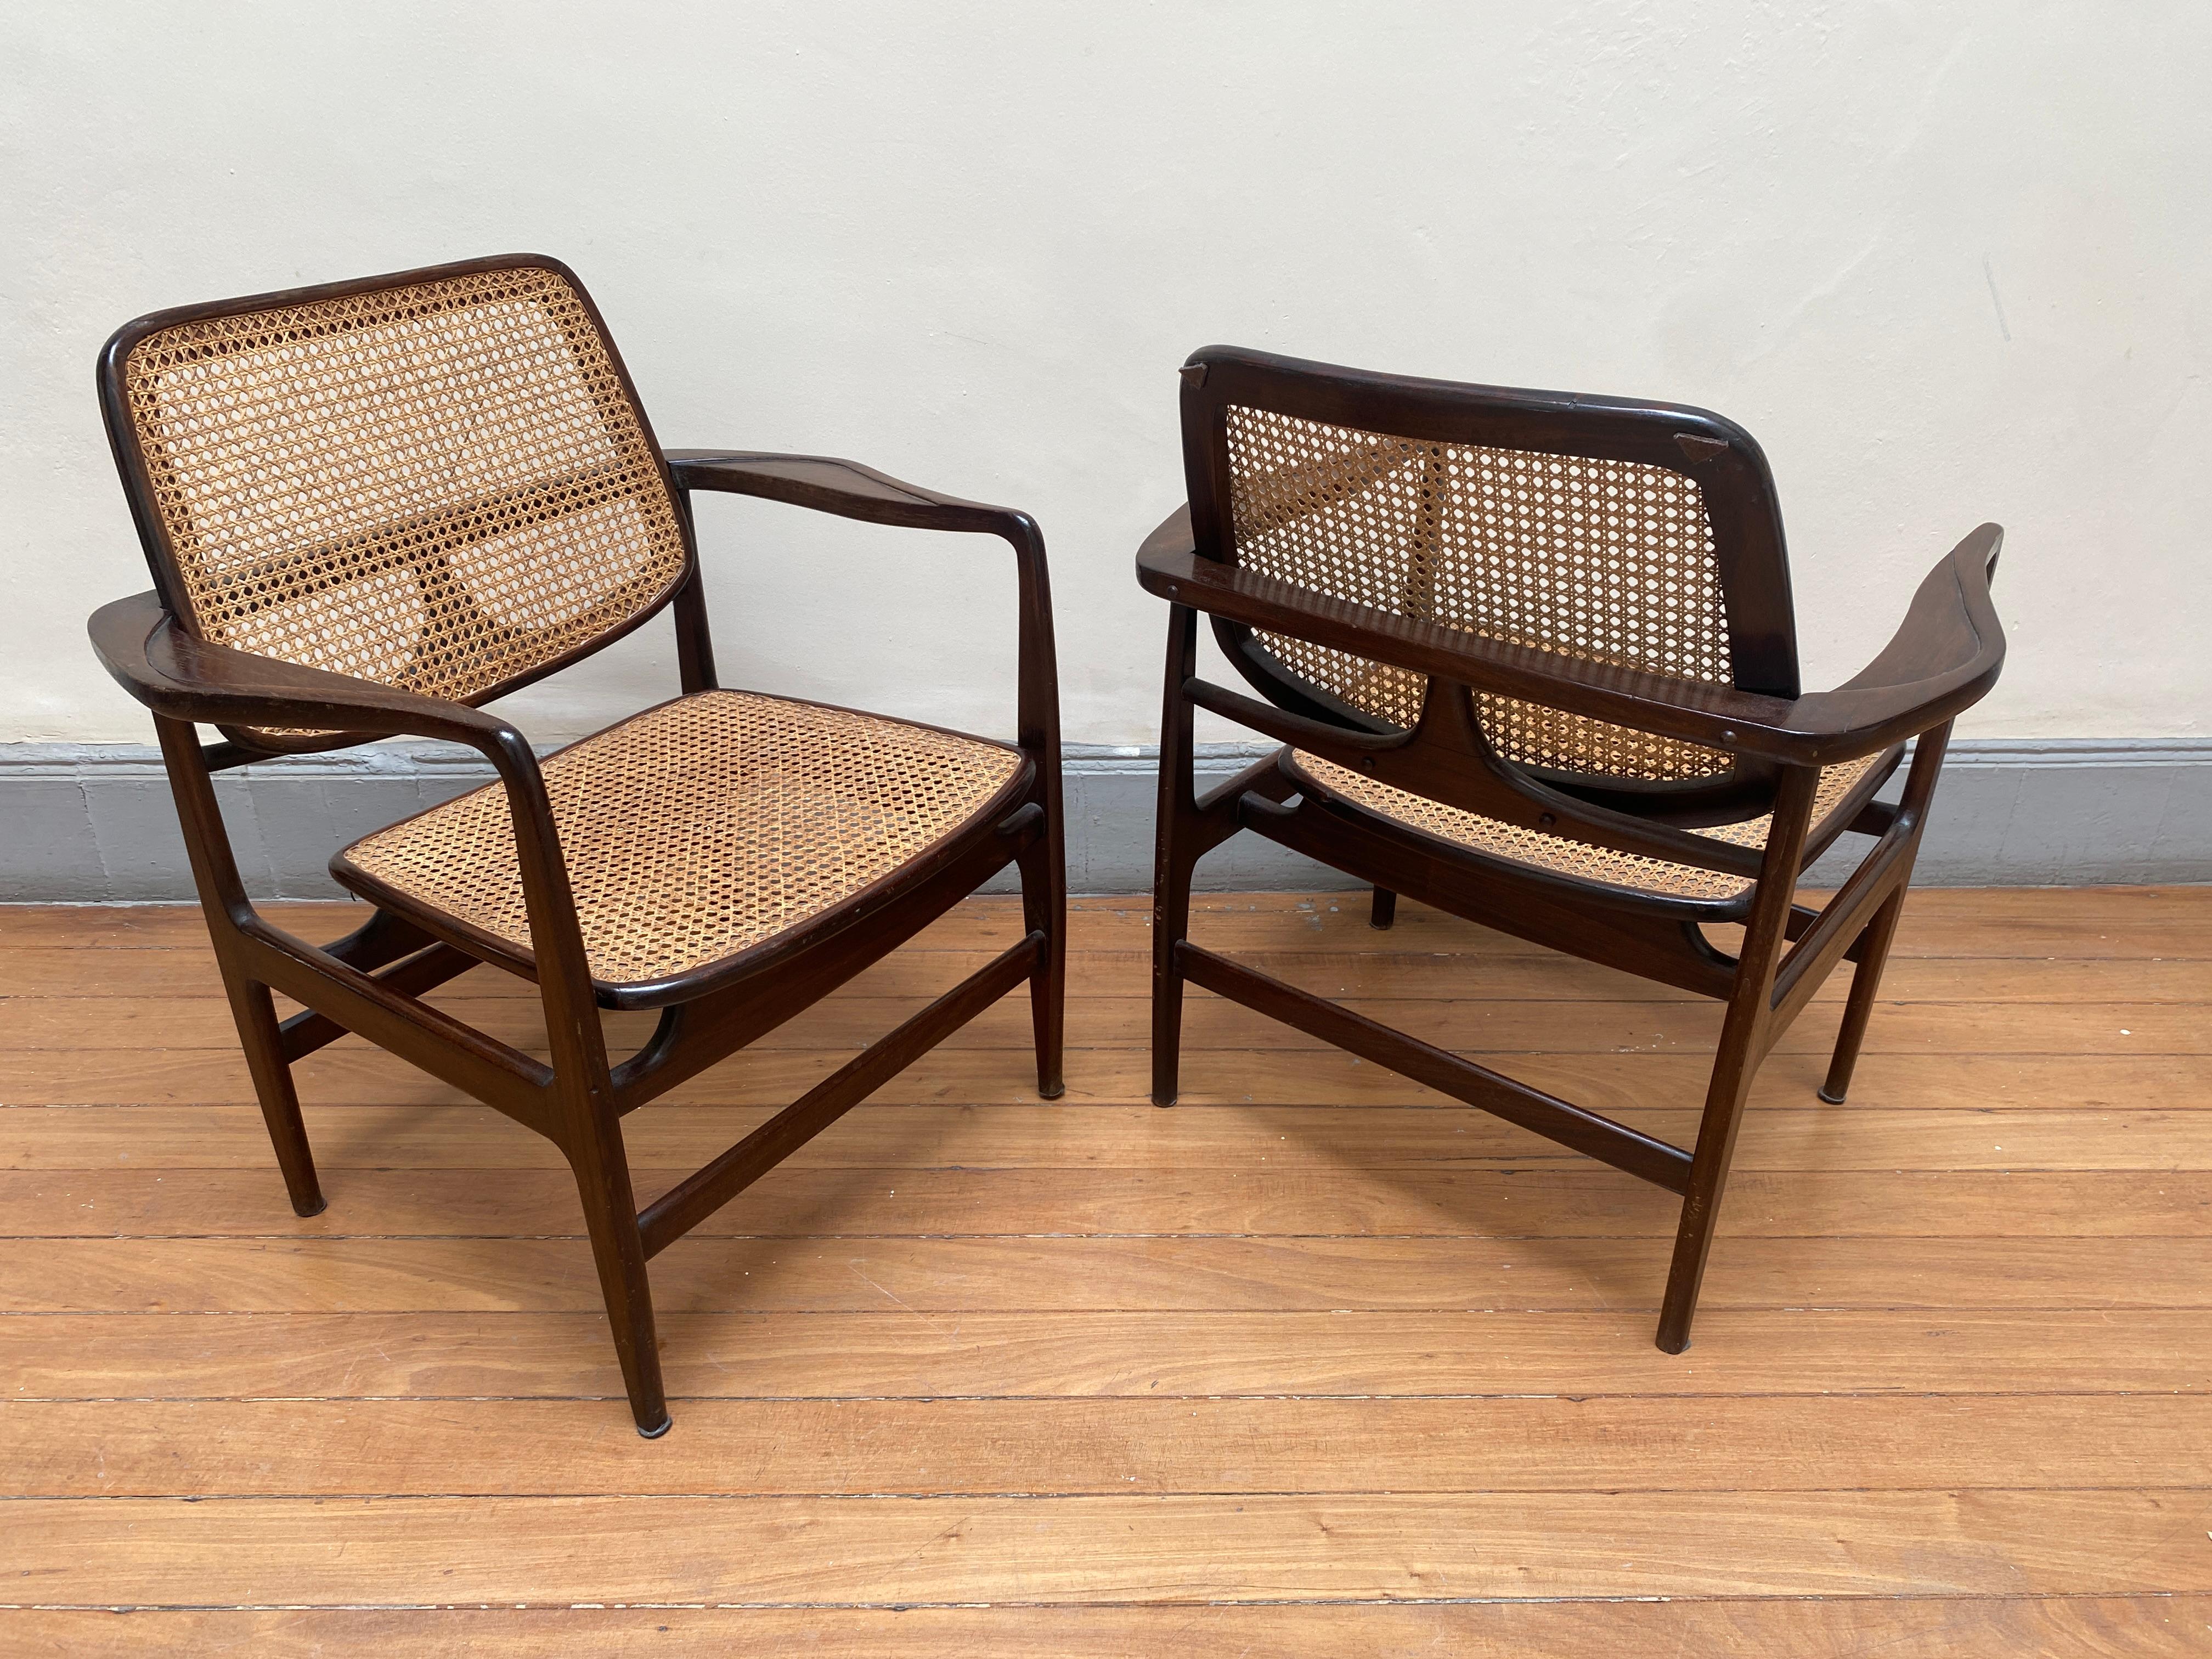 Varnished Set of Two Mid-Century Modern Oscar Armchairs by Sergio Rodrigues, Brazil, 1956 For Sale